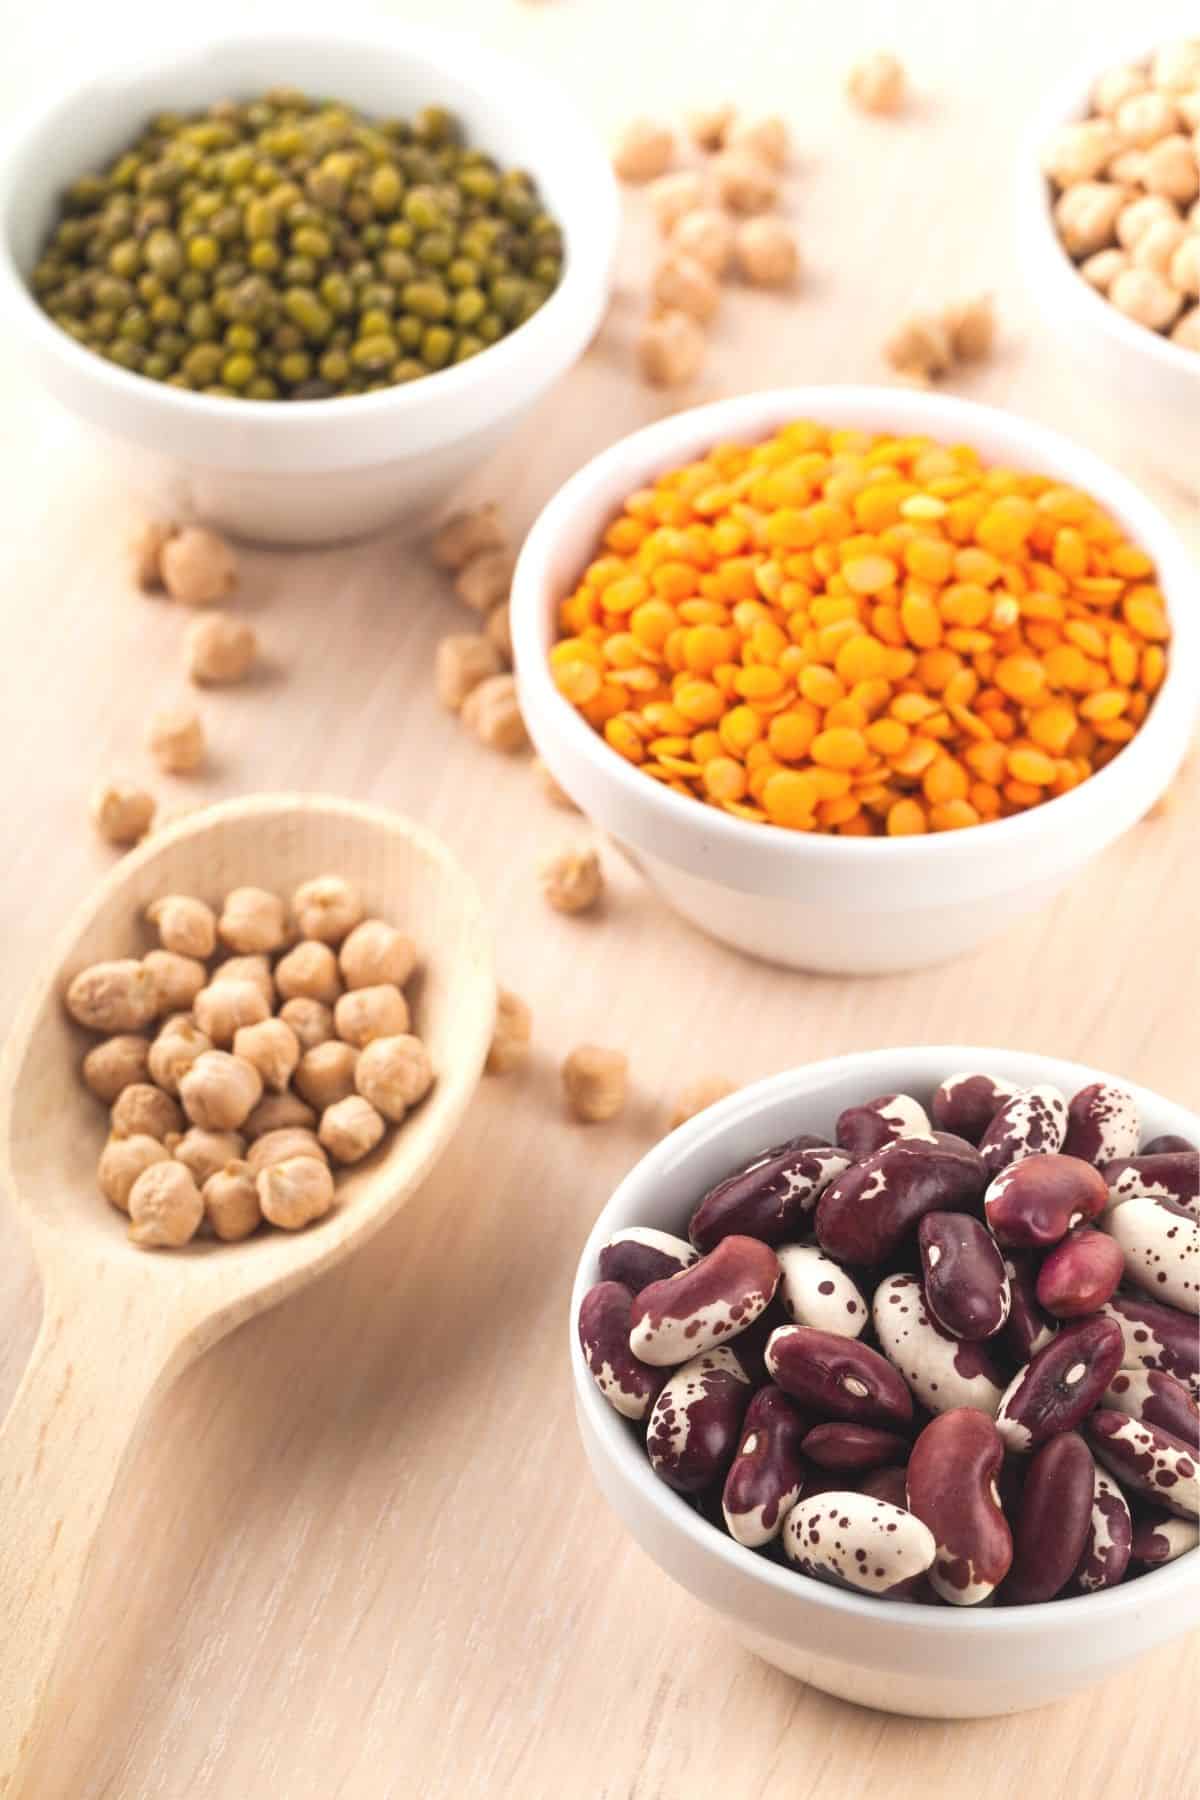 Bowls of dried beans and peas